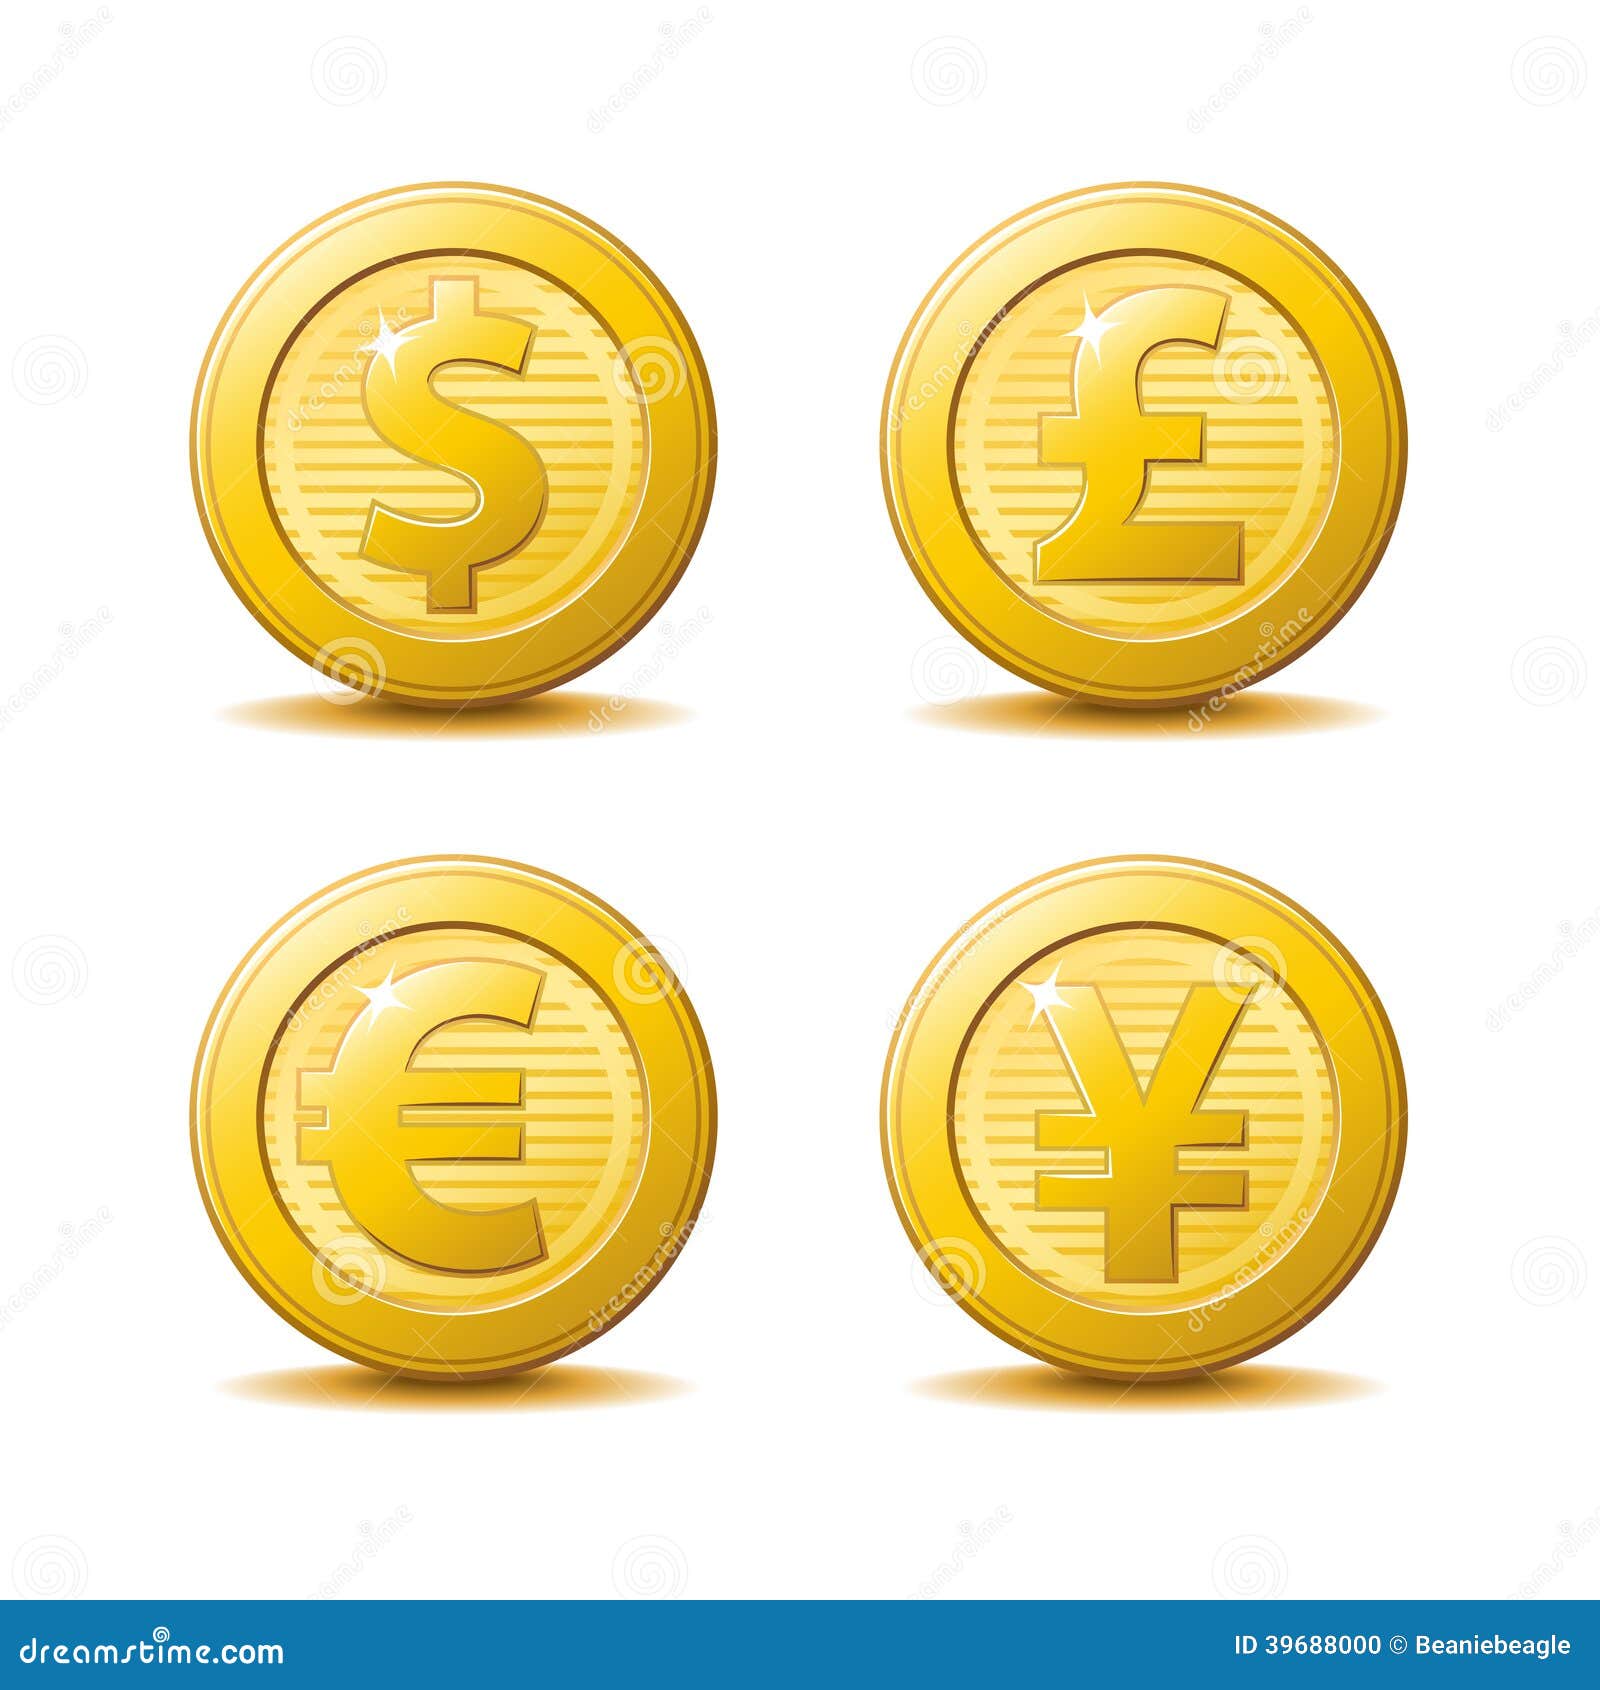 gold coin icons